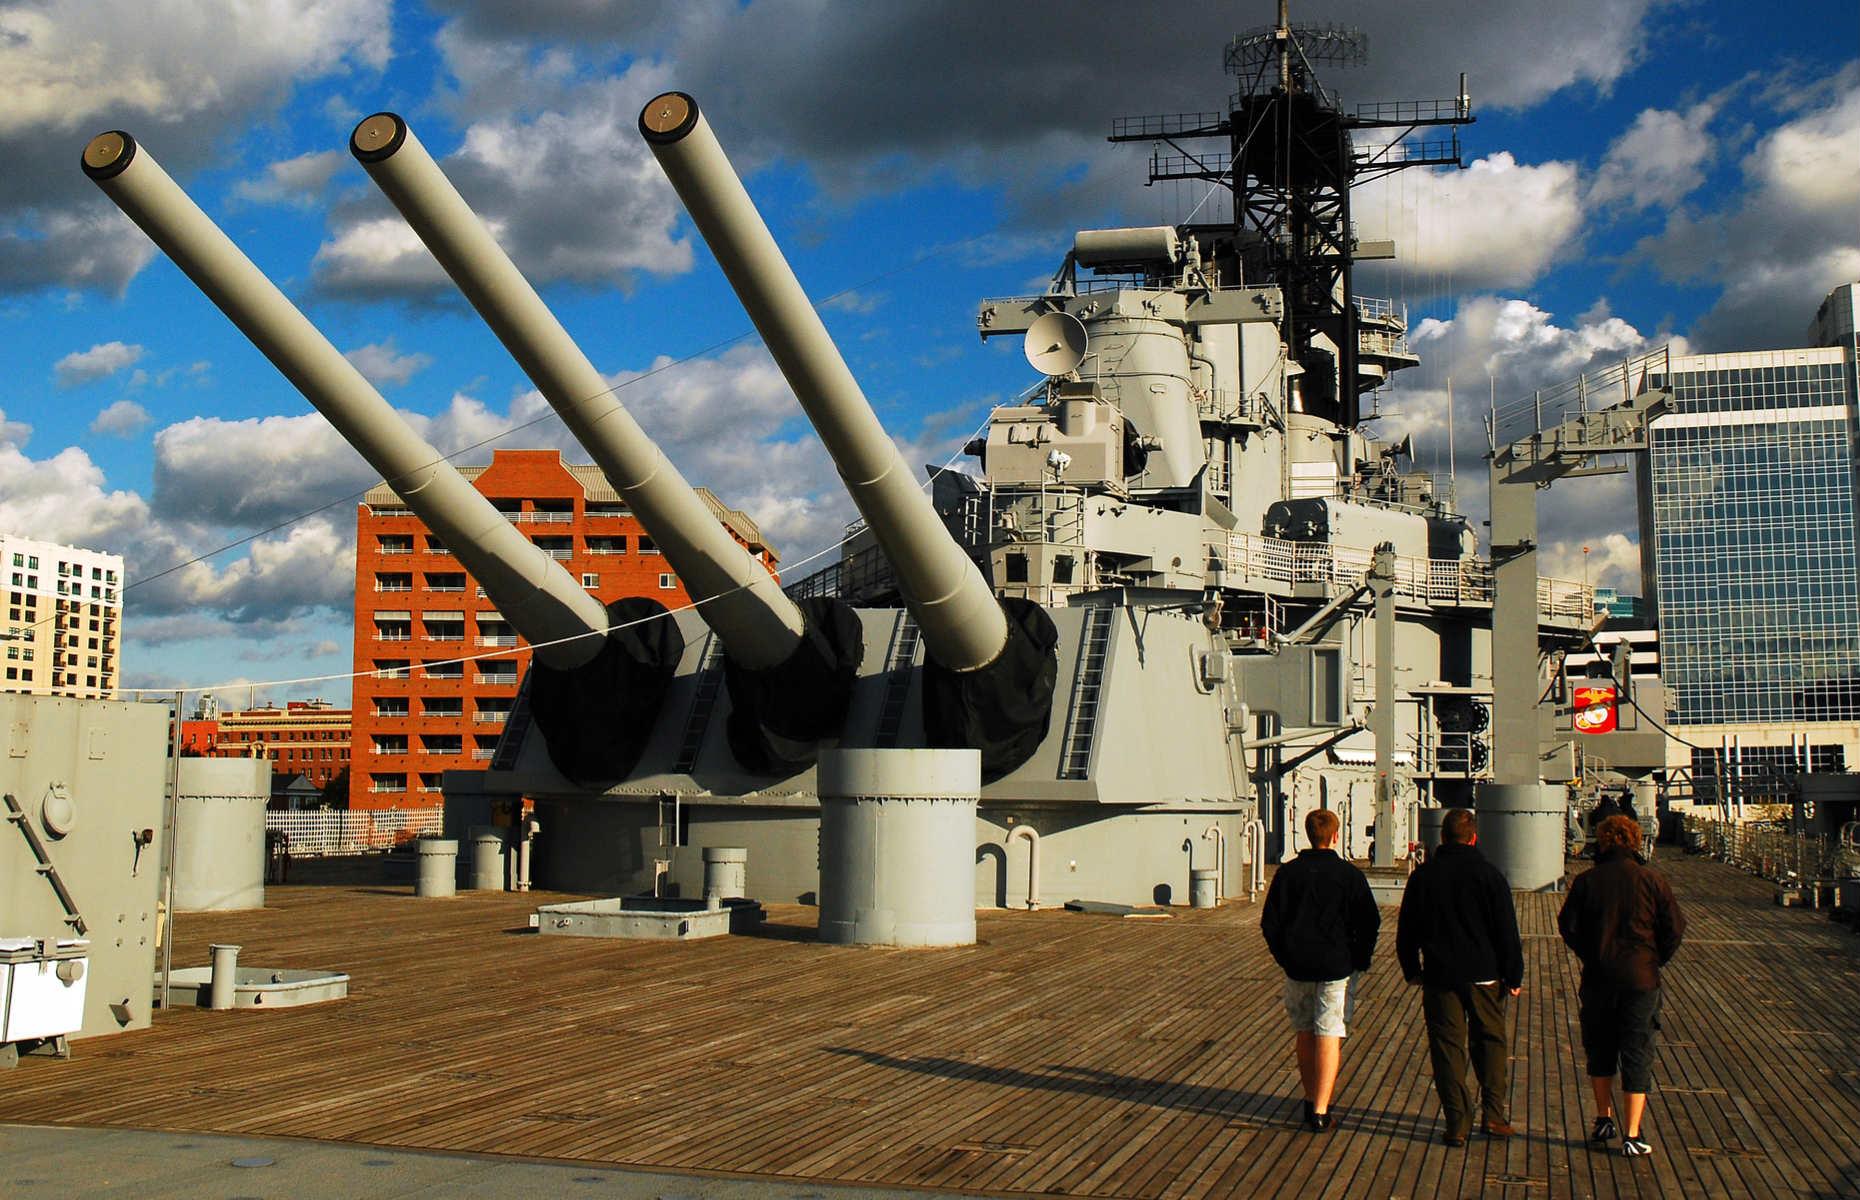 <p>A visit to the USS Wisconsin is fascinating. You can <a href="https://nauticus.org/visitor-info/">explore its deck on your own</a> or take a guided tour led by enlisted volunteers or retired officers. Norfolk is Virginia’s second-largest city, and something of a hidden highlight with the fantastic Chrysler Museum of Art and the lovely riverside Virginia Zoo, too. </p>